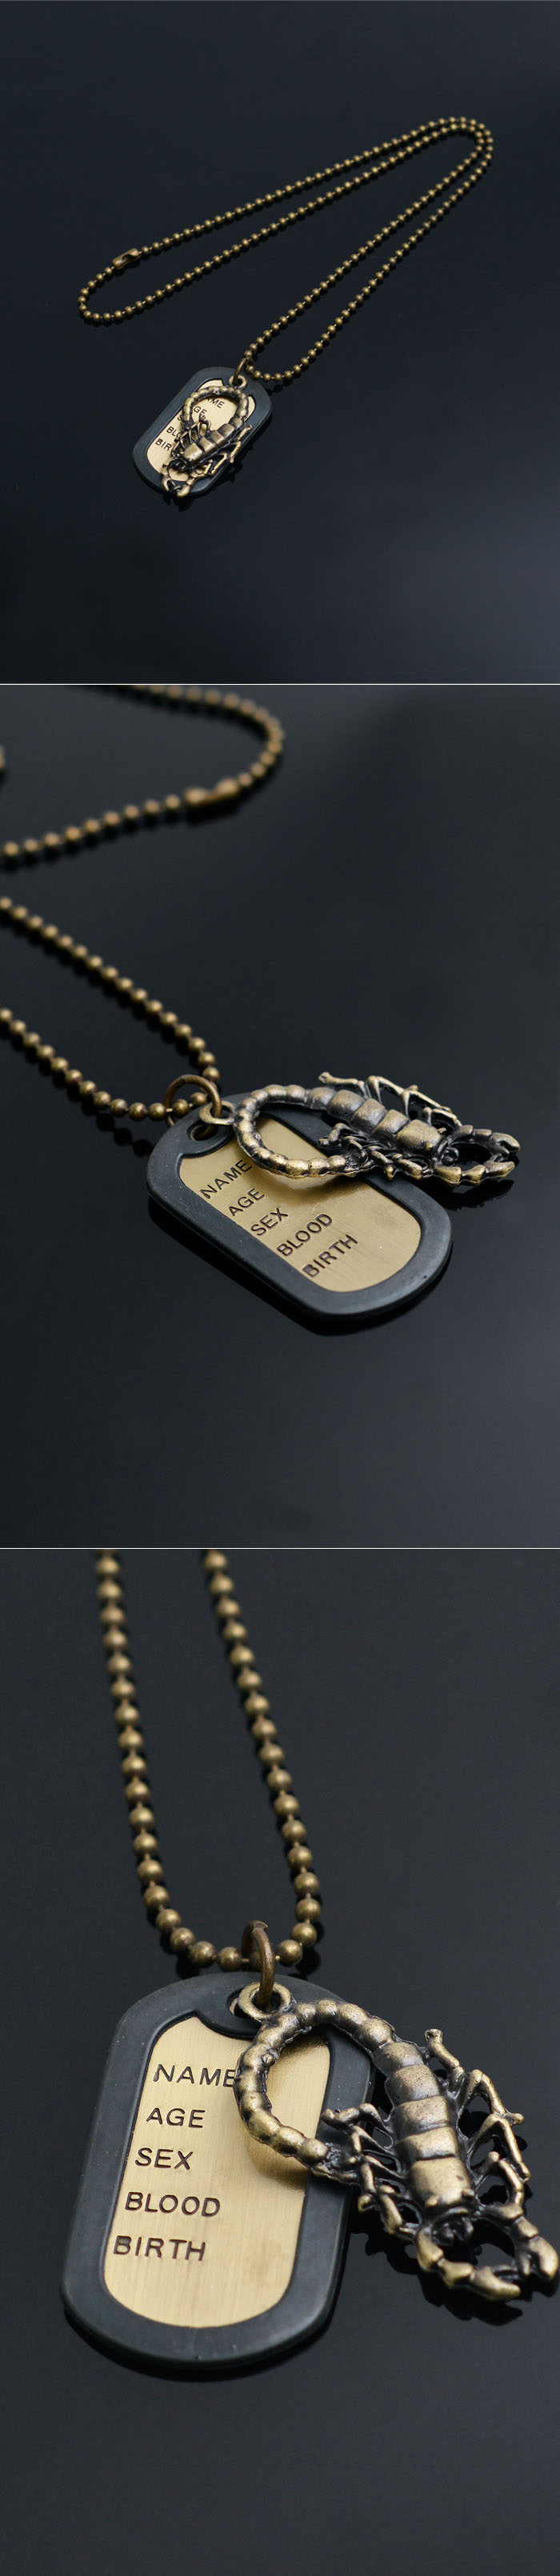 Accessories :: Necklaces :: Gold Pendant Dogtag Ball Chain-Necklace 216